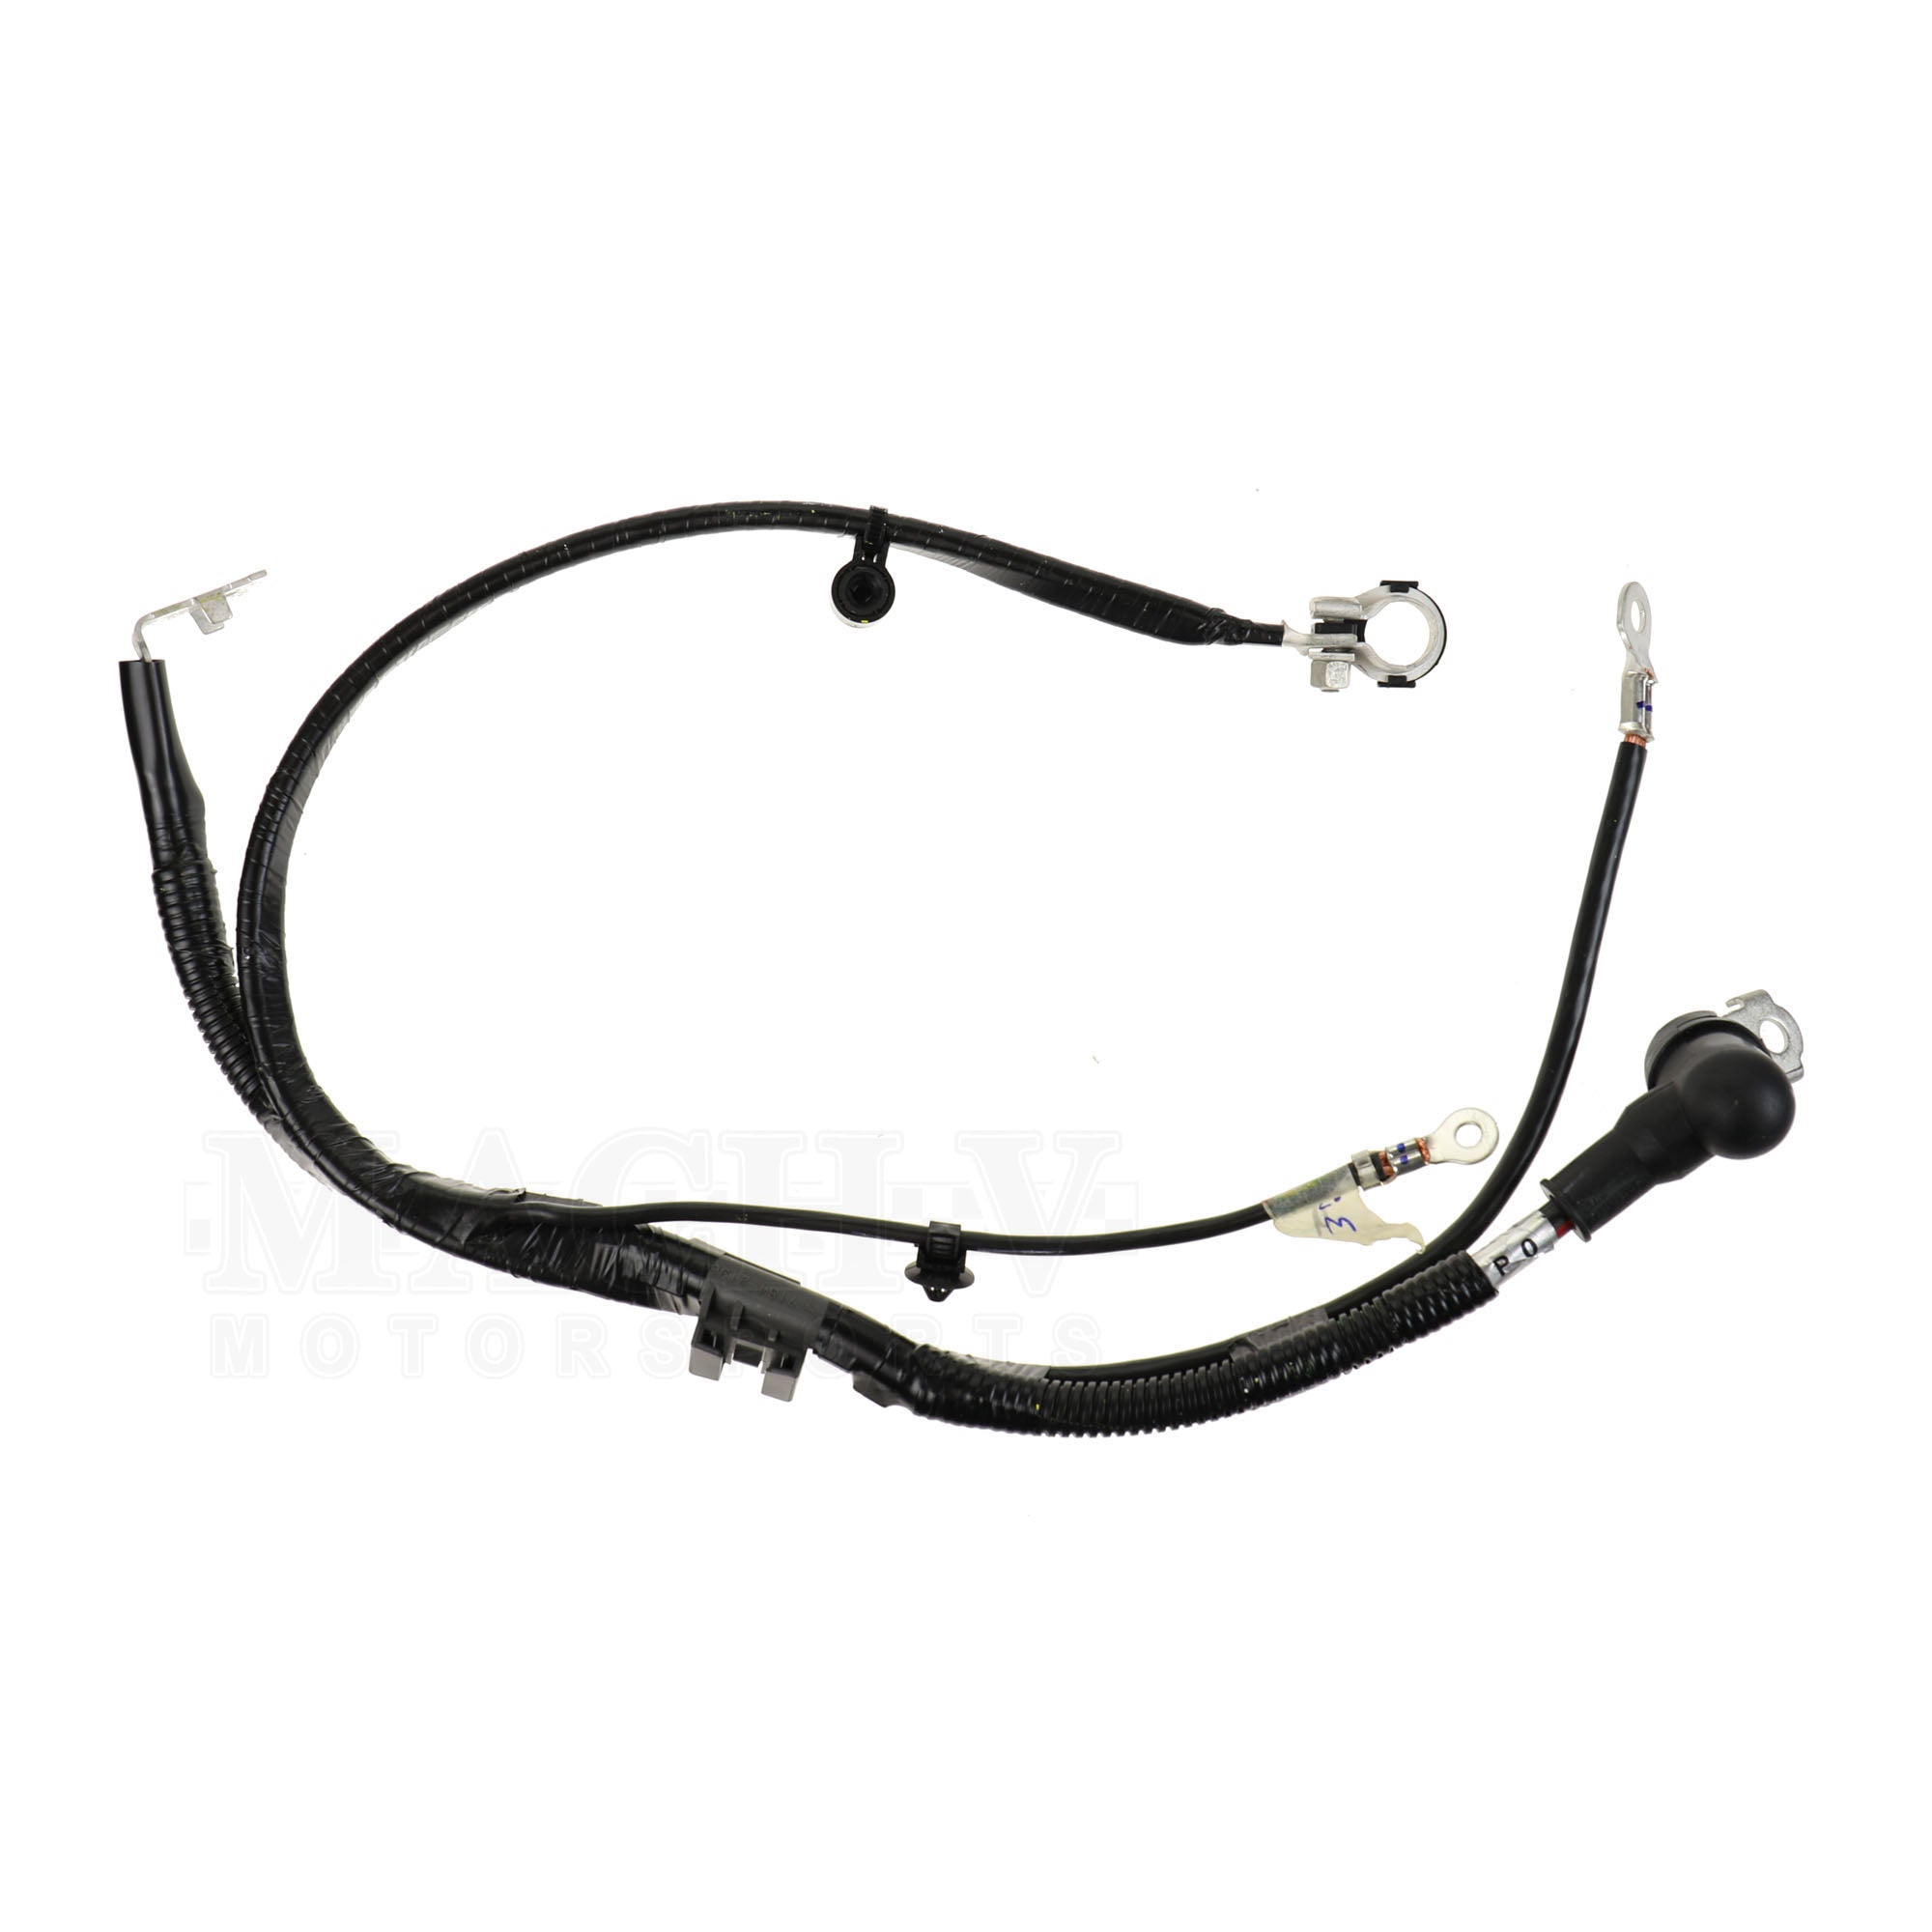 Subaru Battery Cable Assembly 2003-2008 Forester